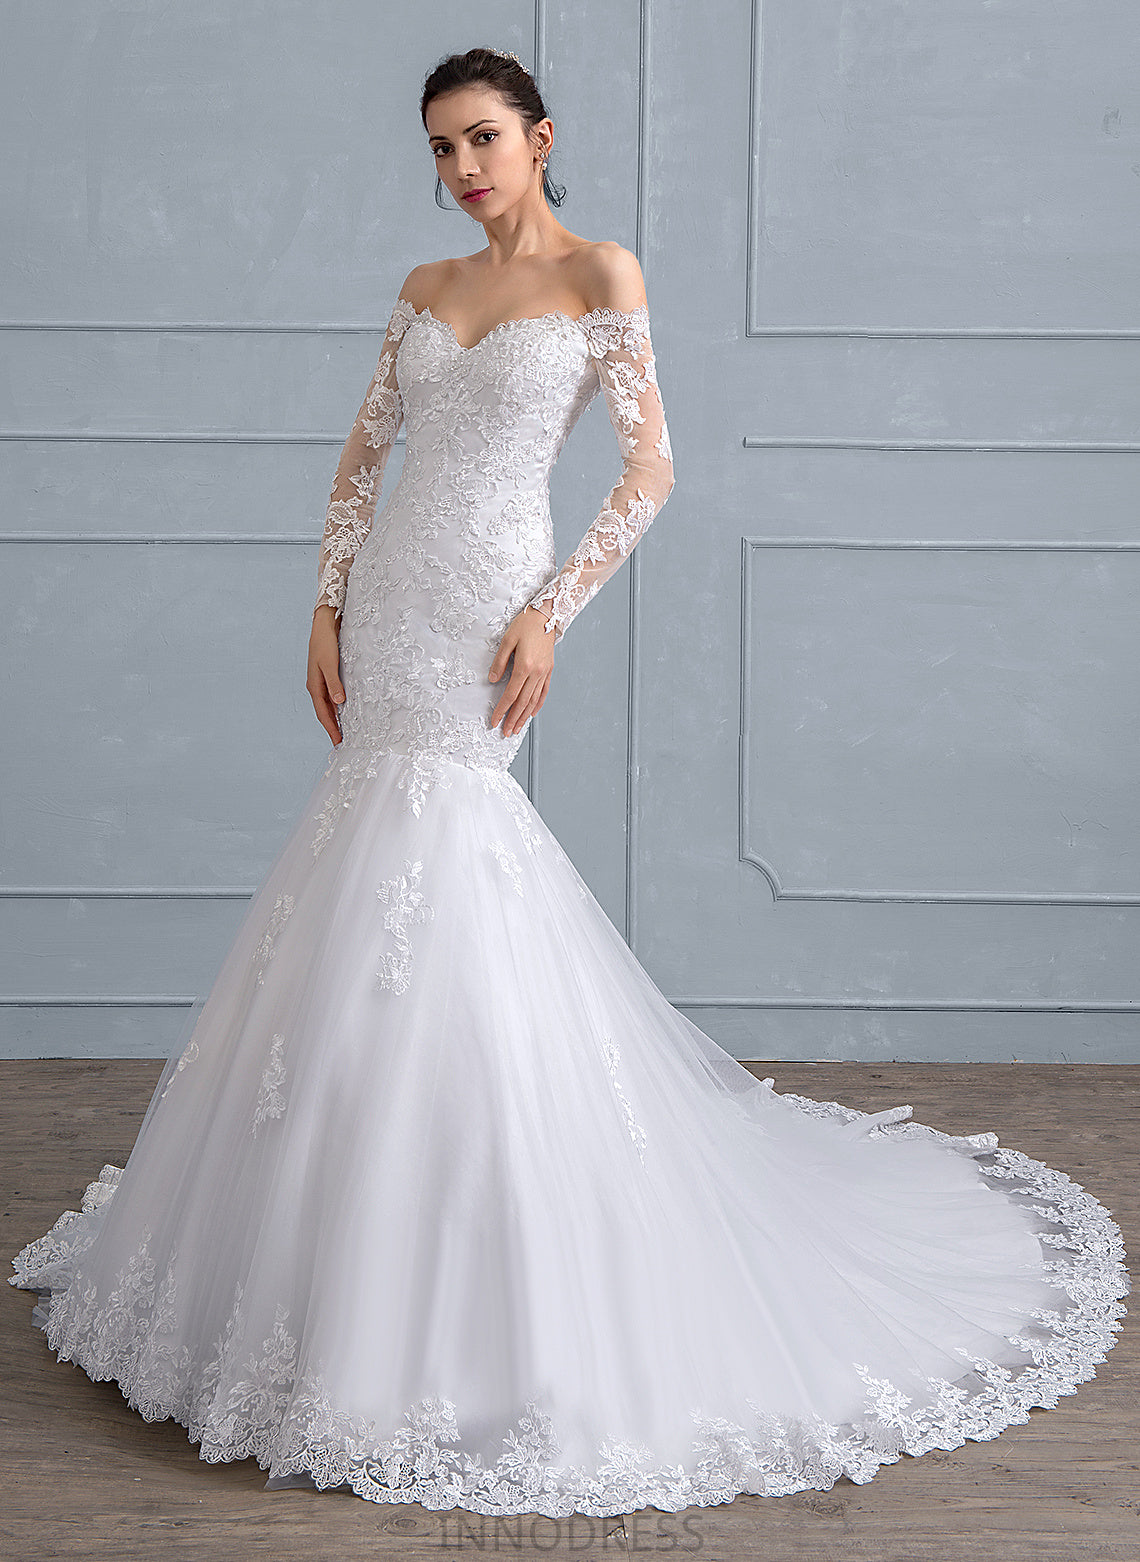 Court Tulle Wedding Dresses With Trumpet/Mermaid Beading Dress Off-the-Shoulder Sequins Lace Train Ainsley Wedding